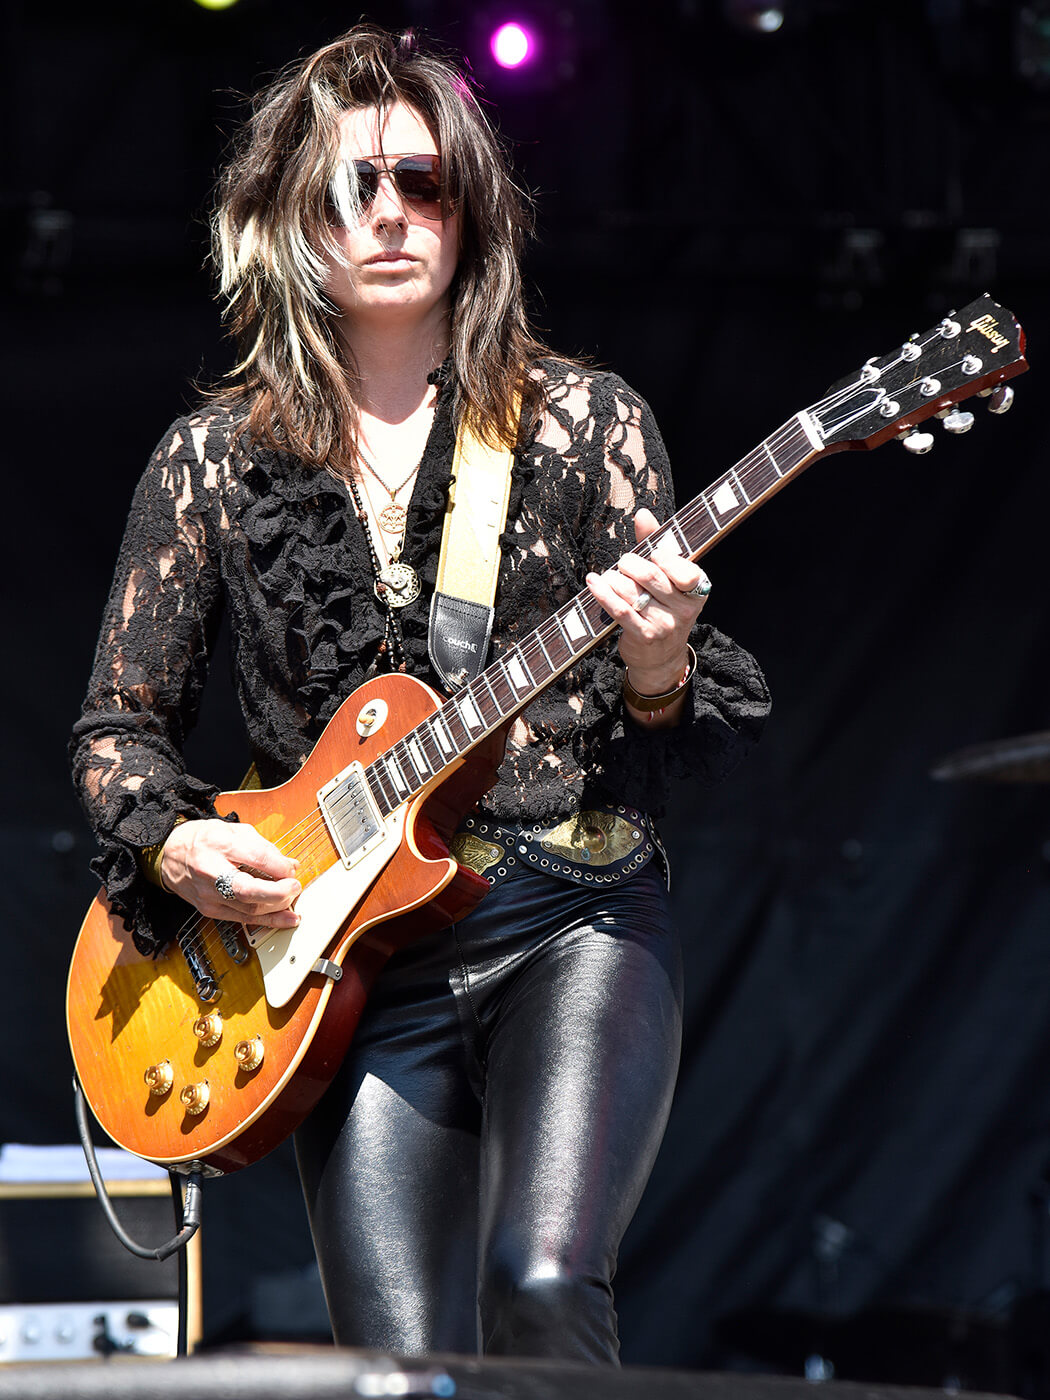 Whitney Petty of Thunderpussy performs during the 2018 Voodoo Music & Arts Experience on October 28, 2018 in New Orleans, Louisiana.